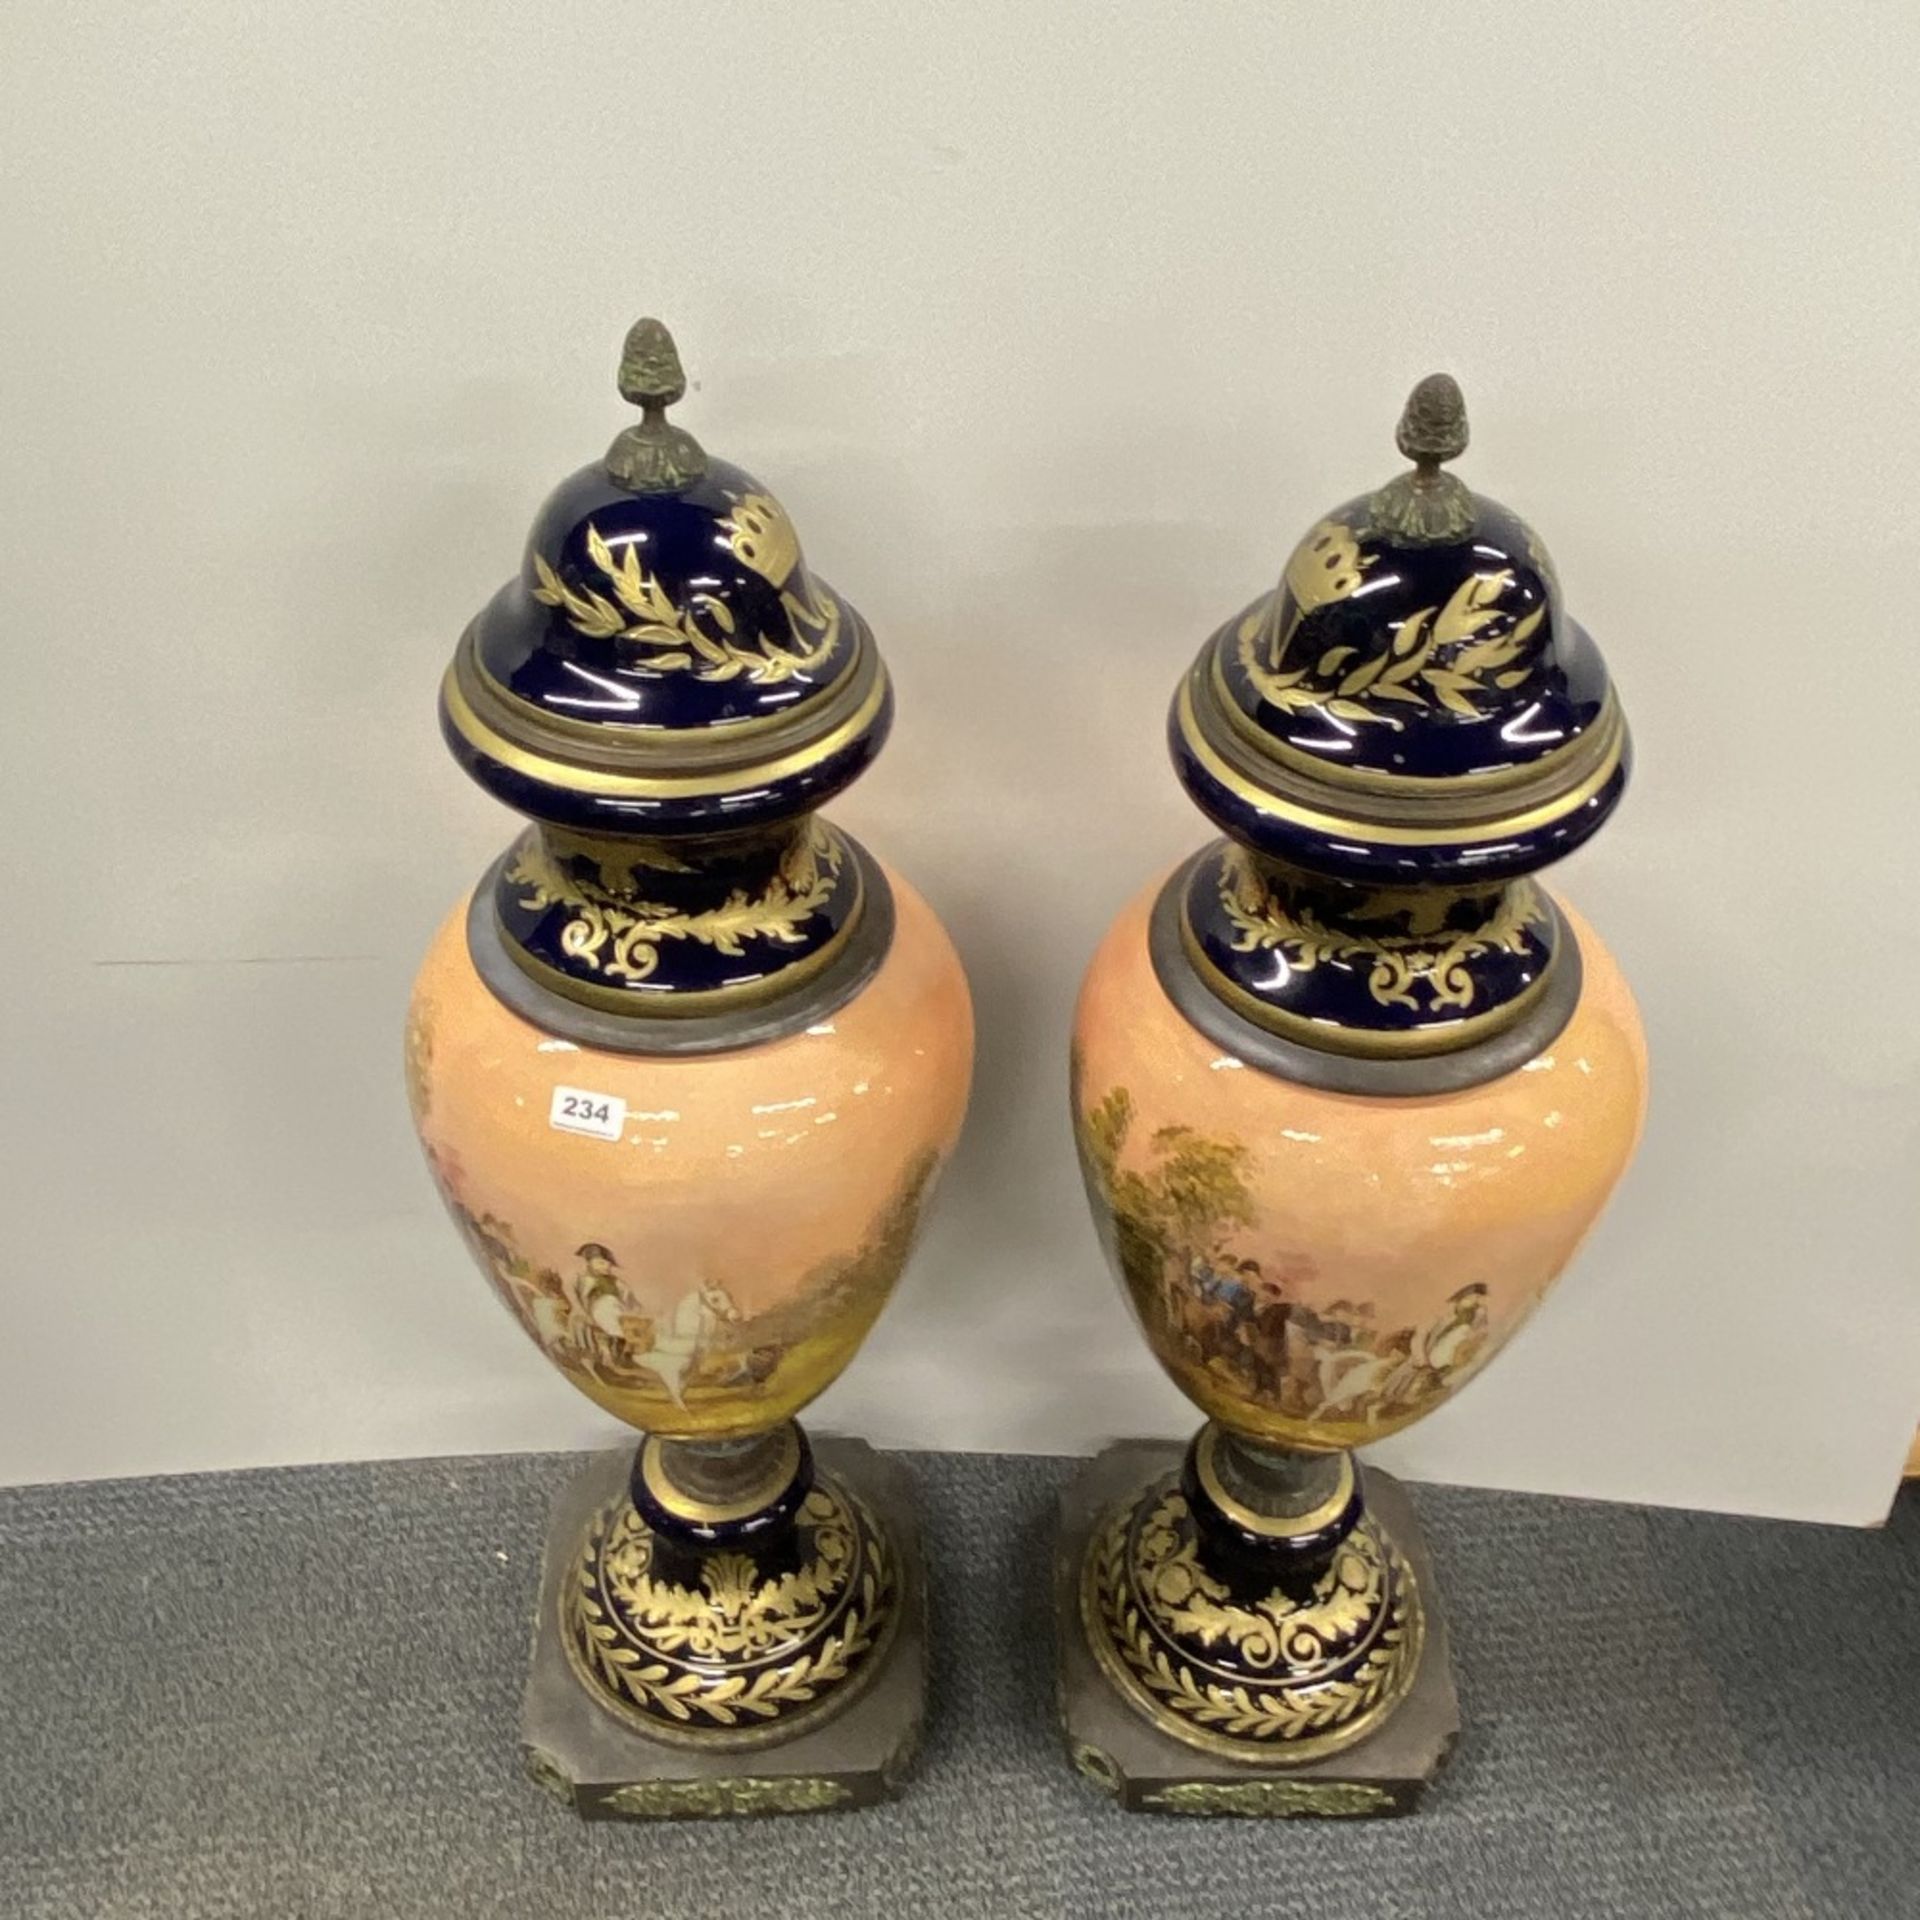 A superb pair of large Continental ceramic and bronze urns and covers, H. 102cm. - Image 2 of 2